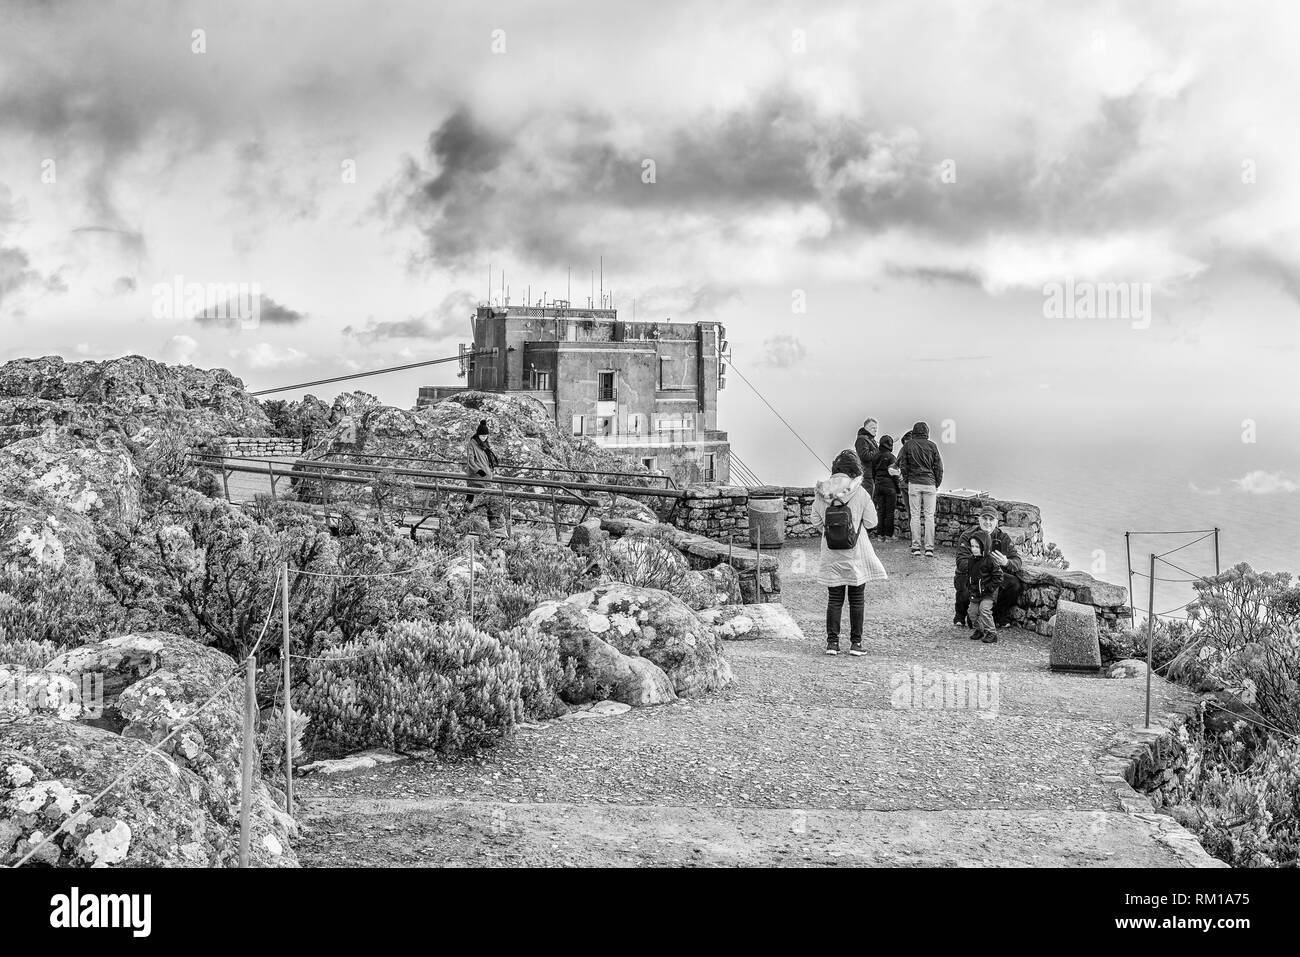 CAPE TOWN, SOUTH AFRICA, AUGUST 17, 2018: A walking trail on the top of Table mountain in Cape Town. The upper cable station and tourists are visible. Stock Photo